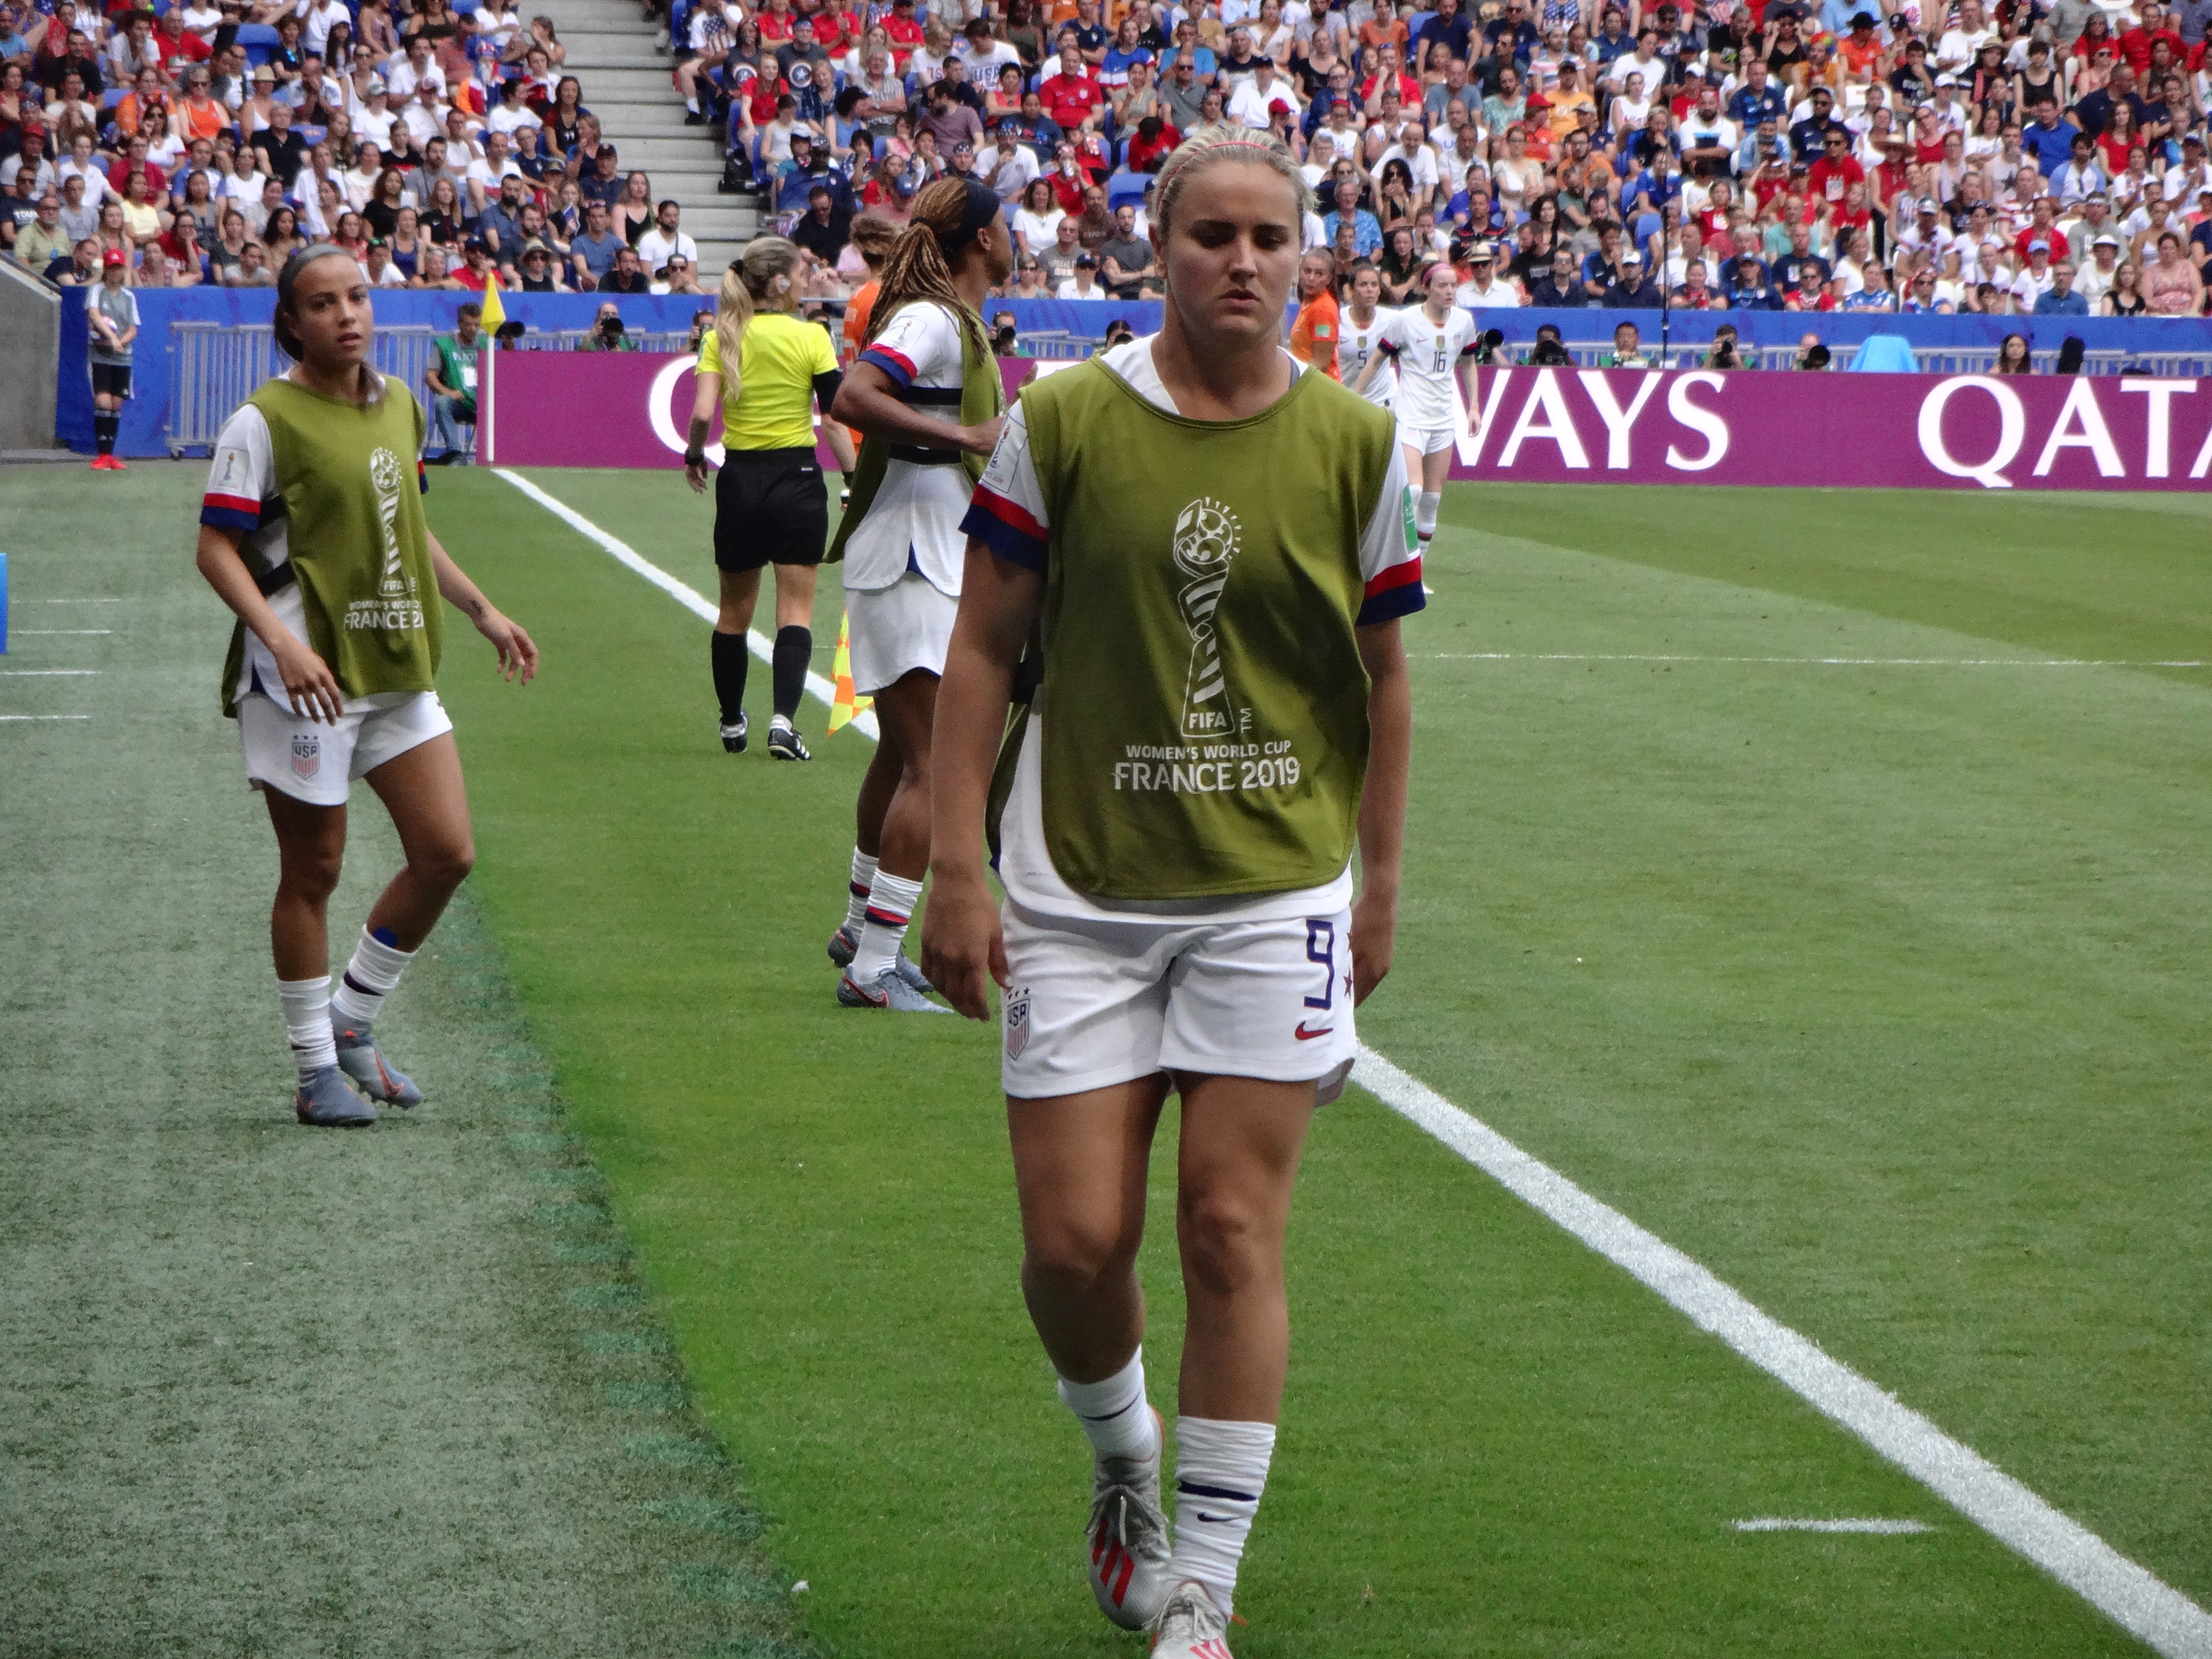 File:FIFA Women's World Cup 2019 Final - US substitutes warming up (3).jpg - Wikimedia Commons